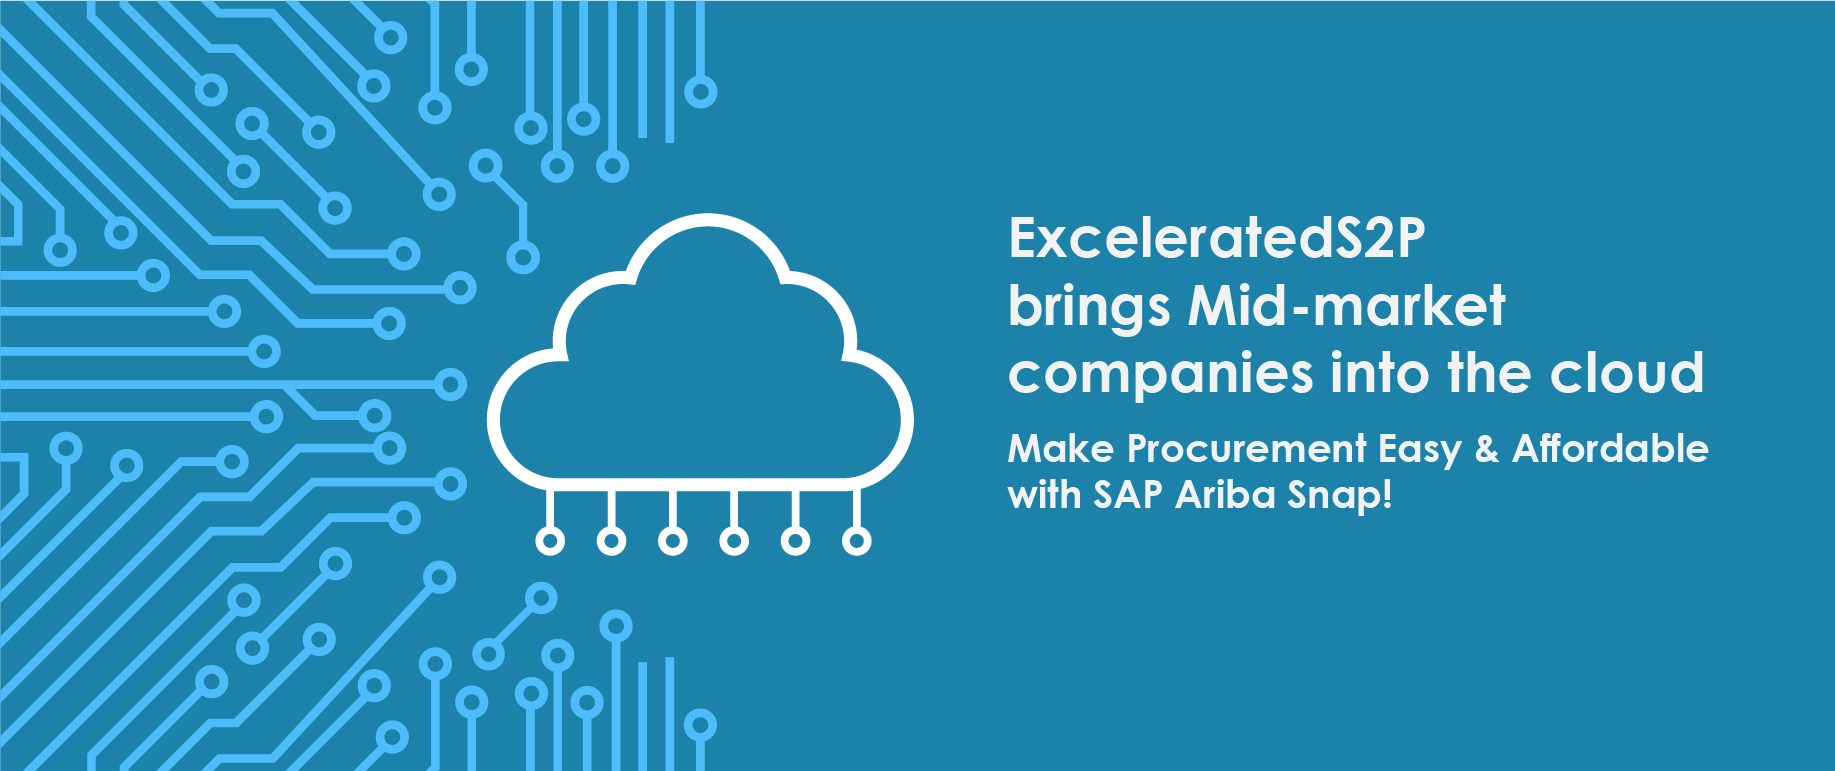 SAP Ariba snap for mid-market companies to move into the cloud, in a an affordable and fast way